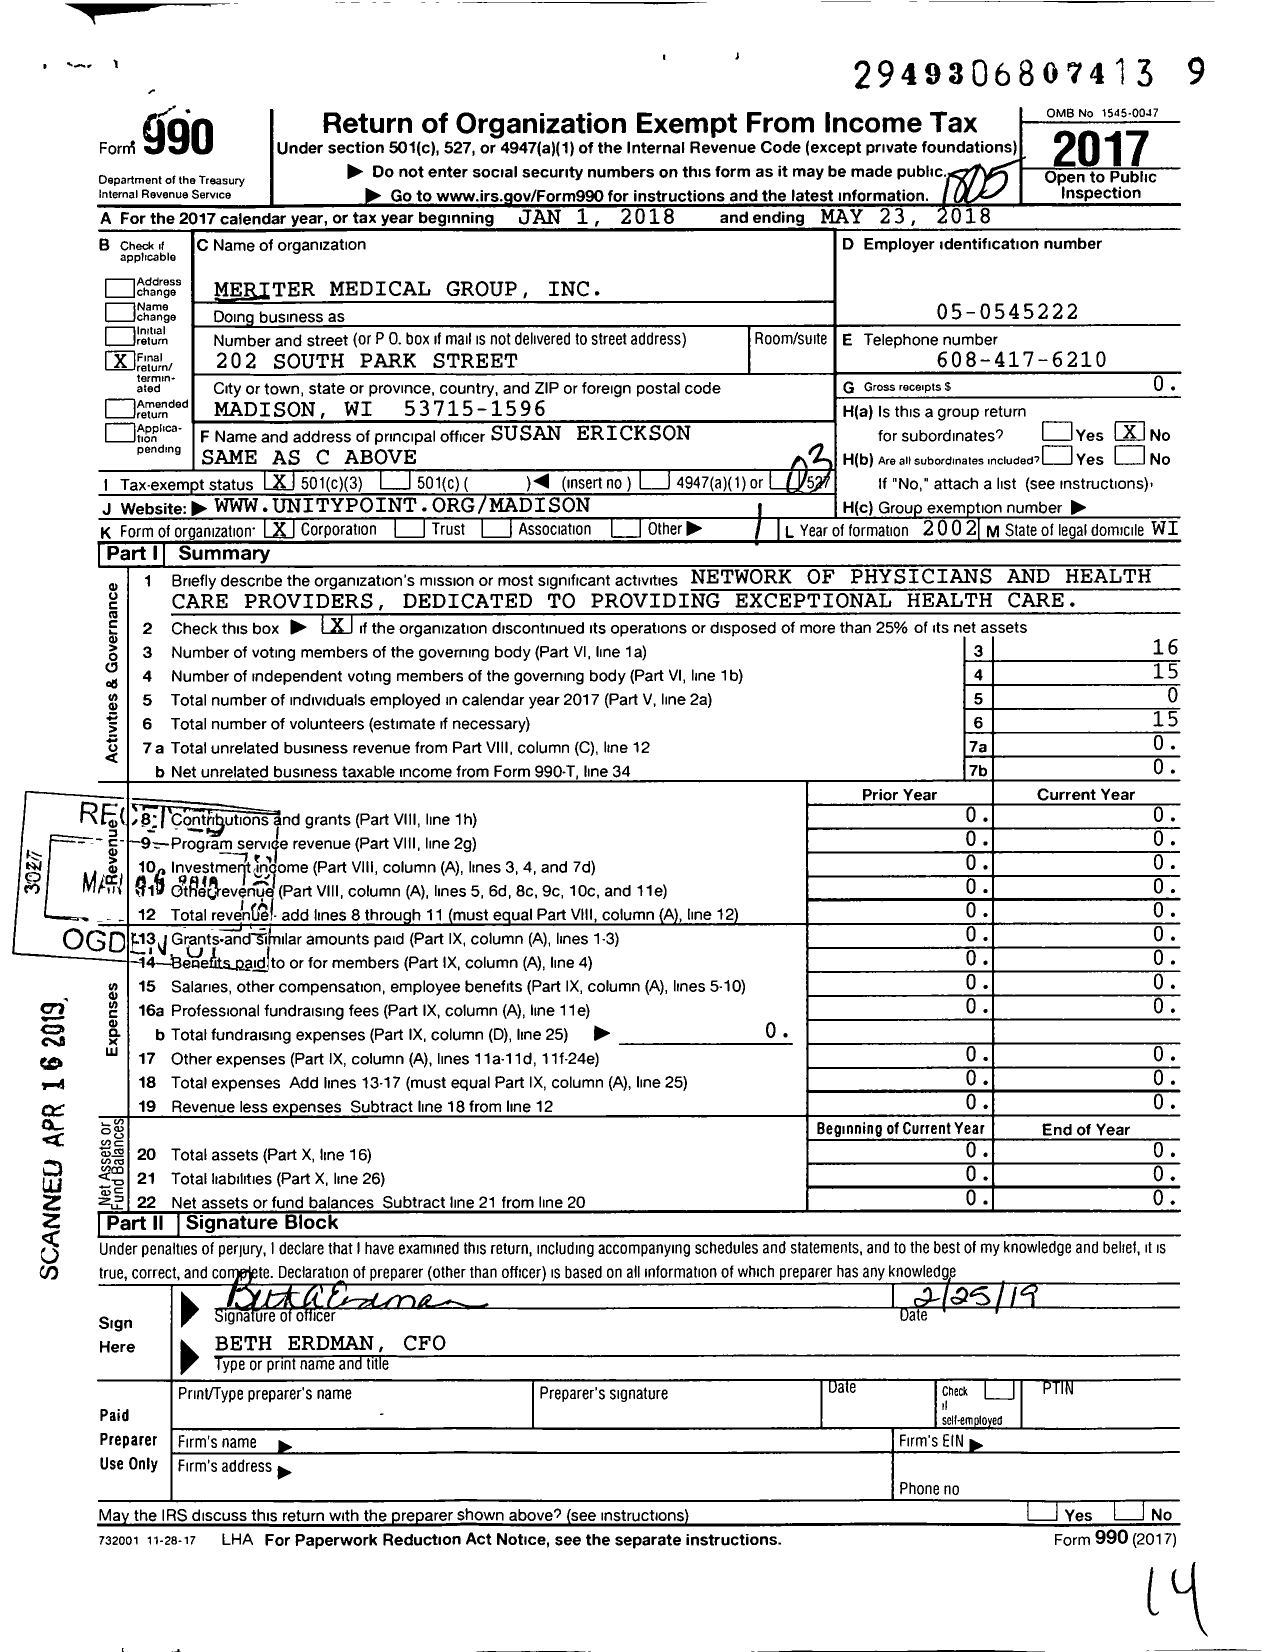 Image of first page of 2017 Form 990 for Meriter Medical Group